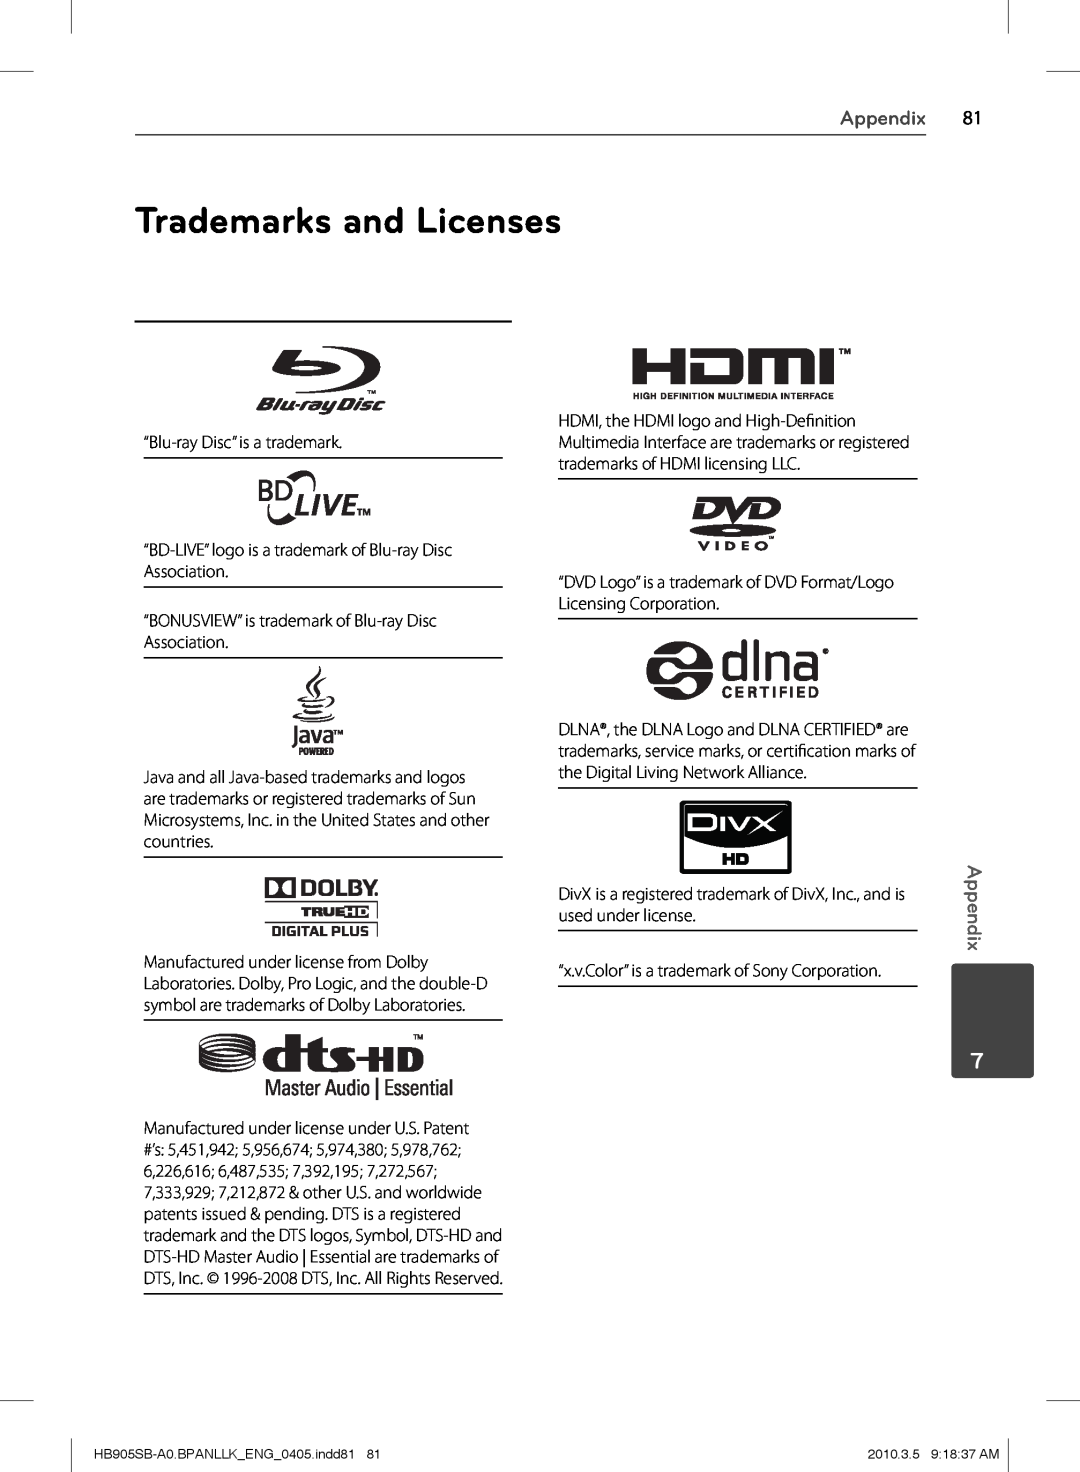 LG Electronics HB905SB owner manual Trademarks and Licenses, Appendix 